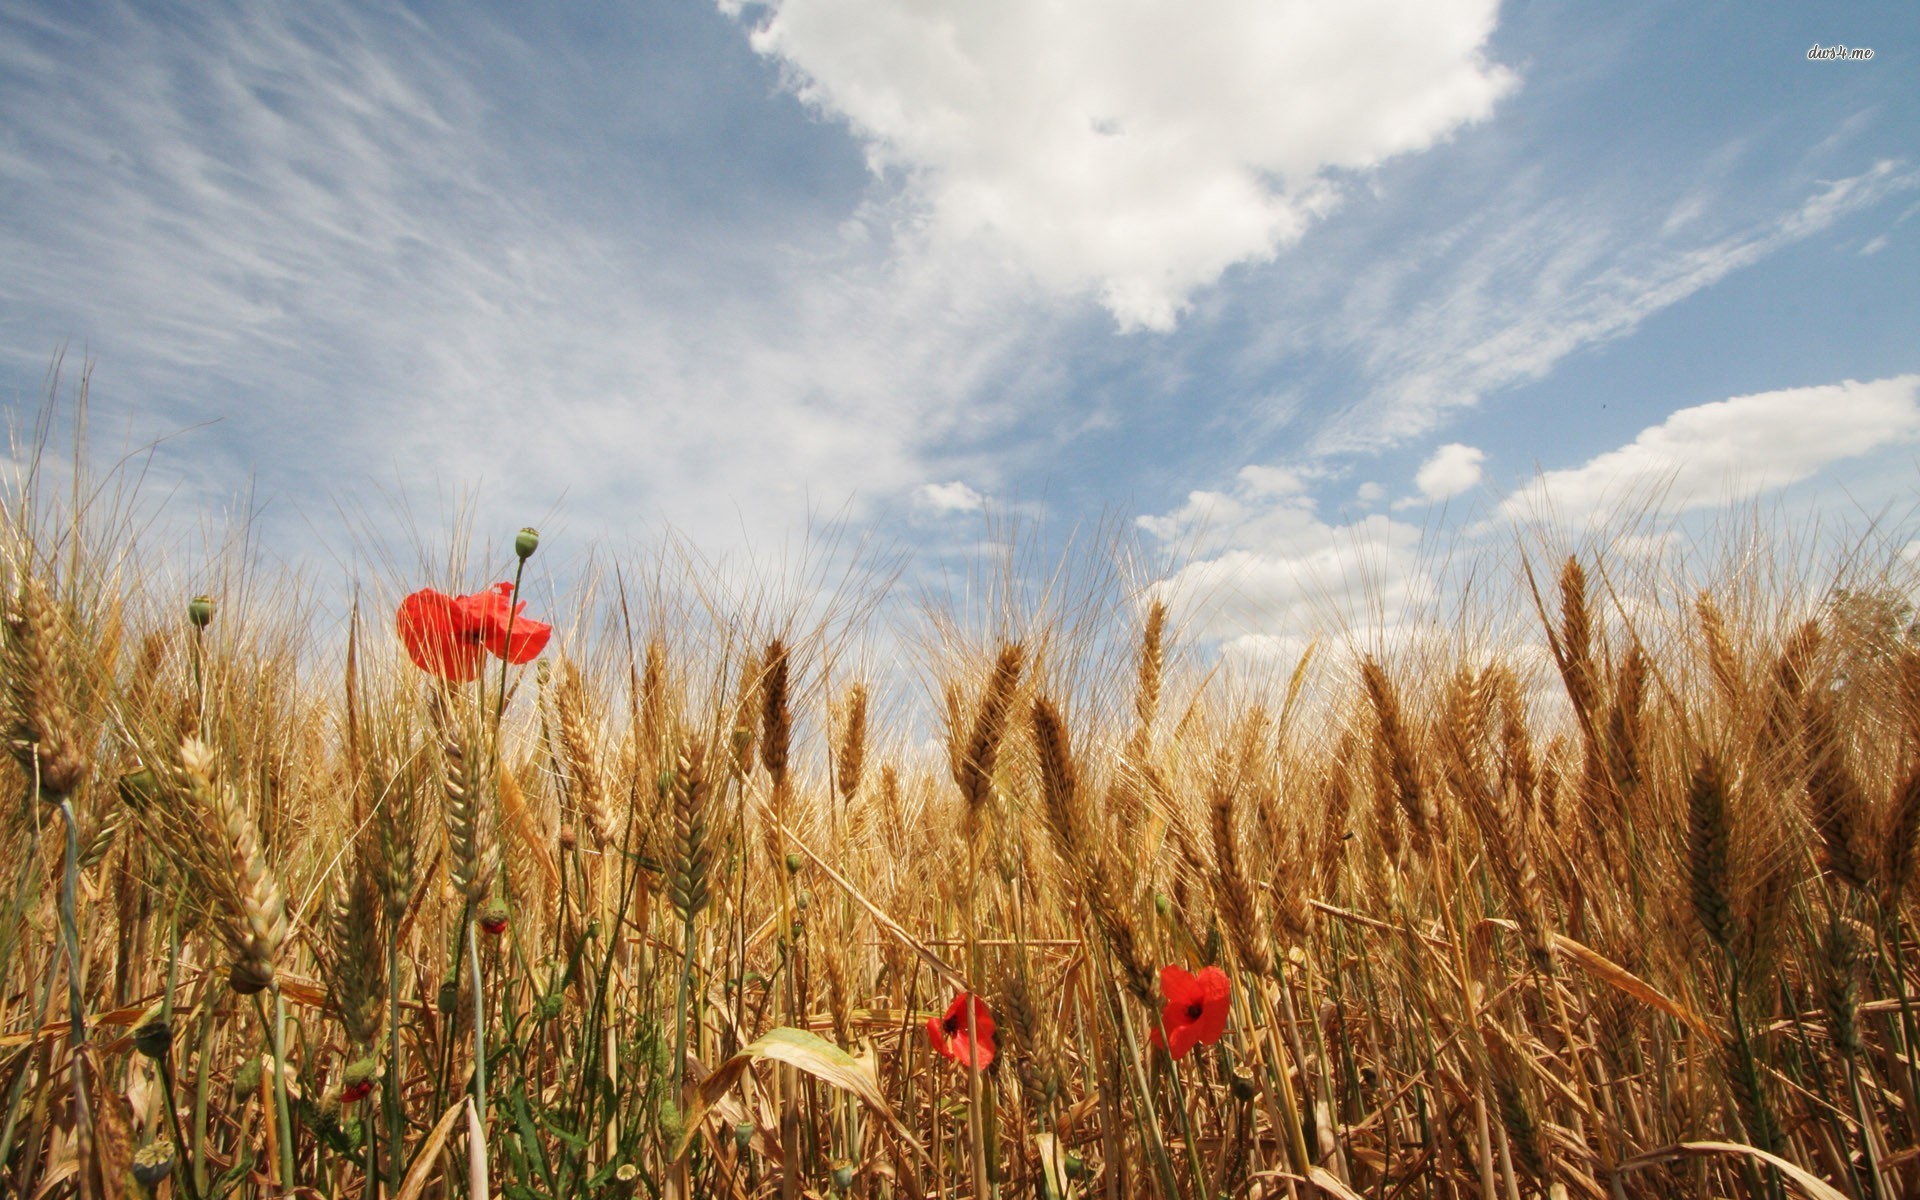 Wheat Field With Poppies - HD Wallpaper 